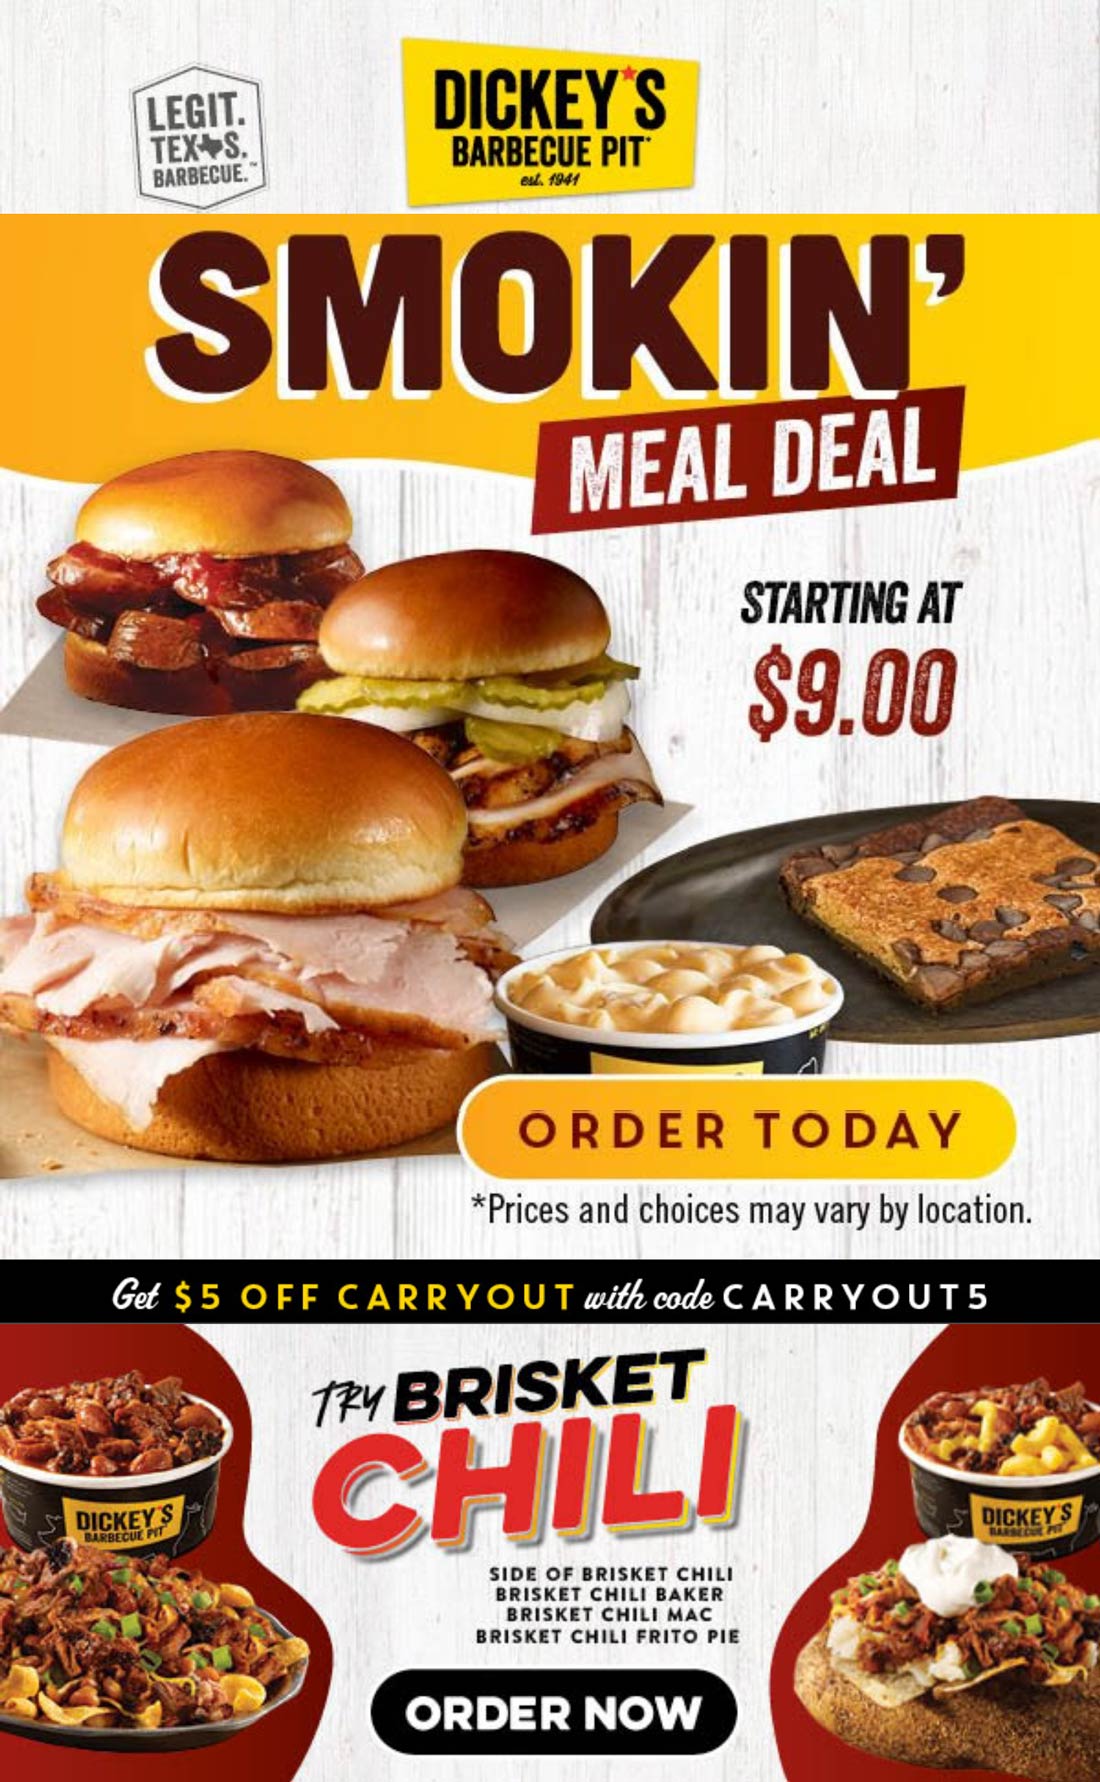 Dickeys Barbecue Pit restaurants Coupon  $5 off carryout at Dickeys Barbecue Pit restaurants via promo code CARRYOUT5 #dickeysbarbecuepit 